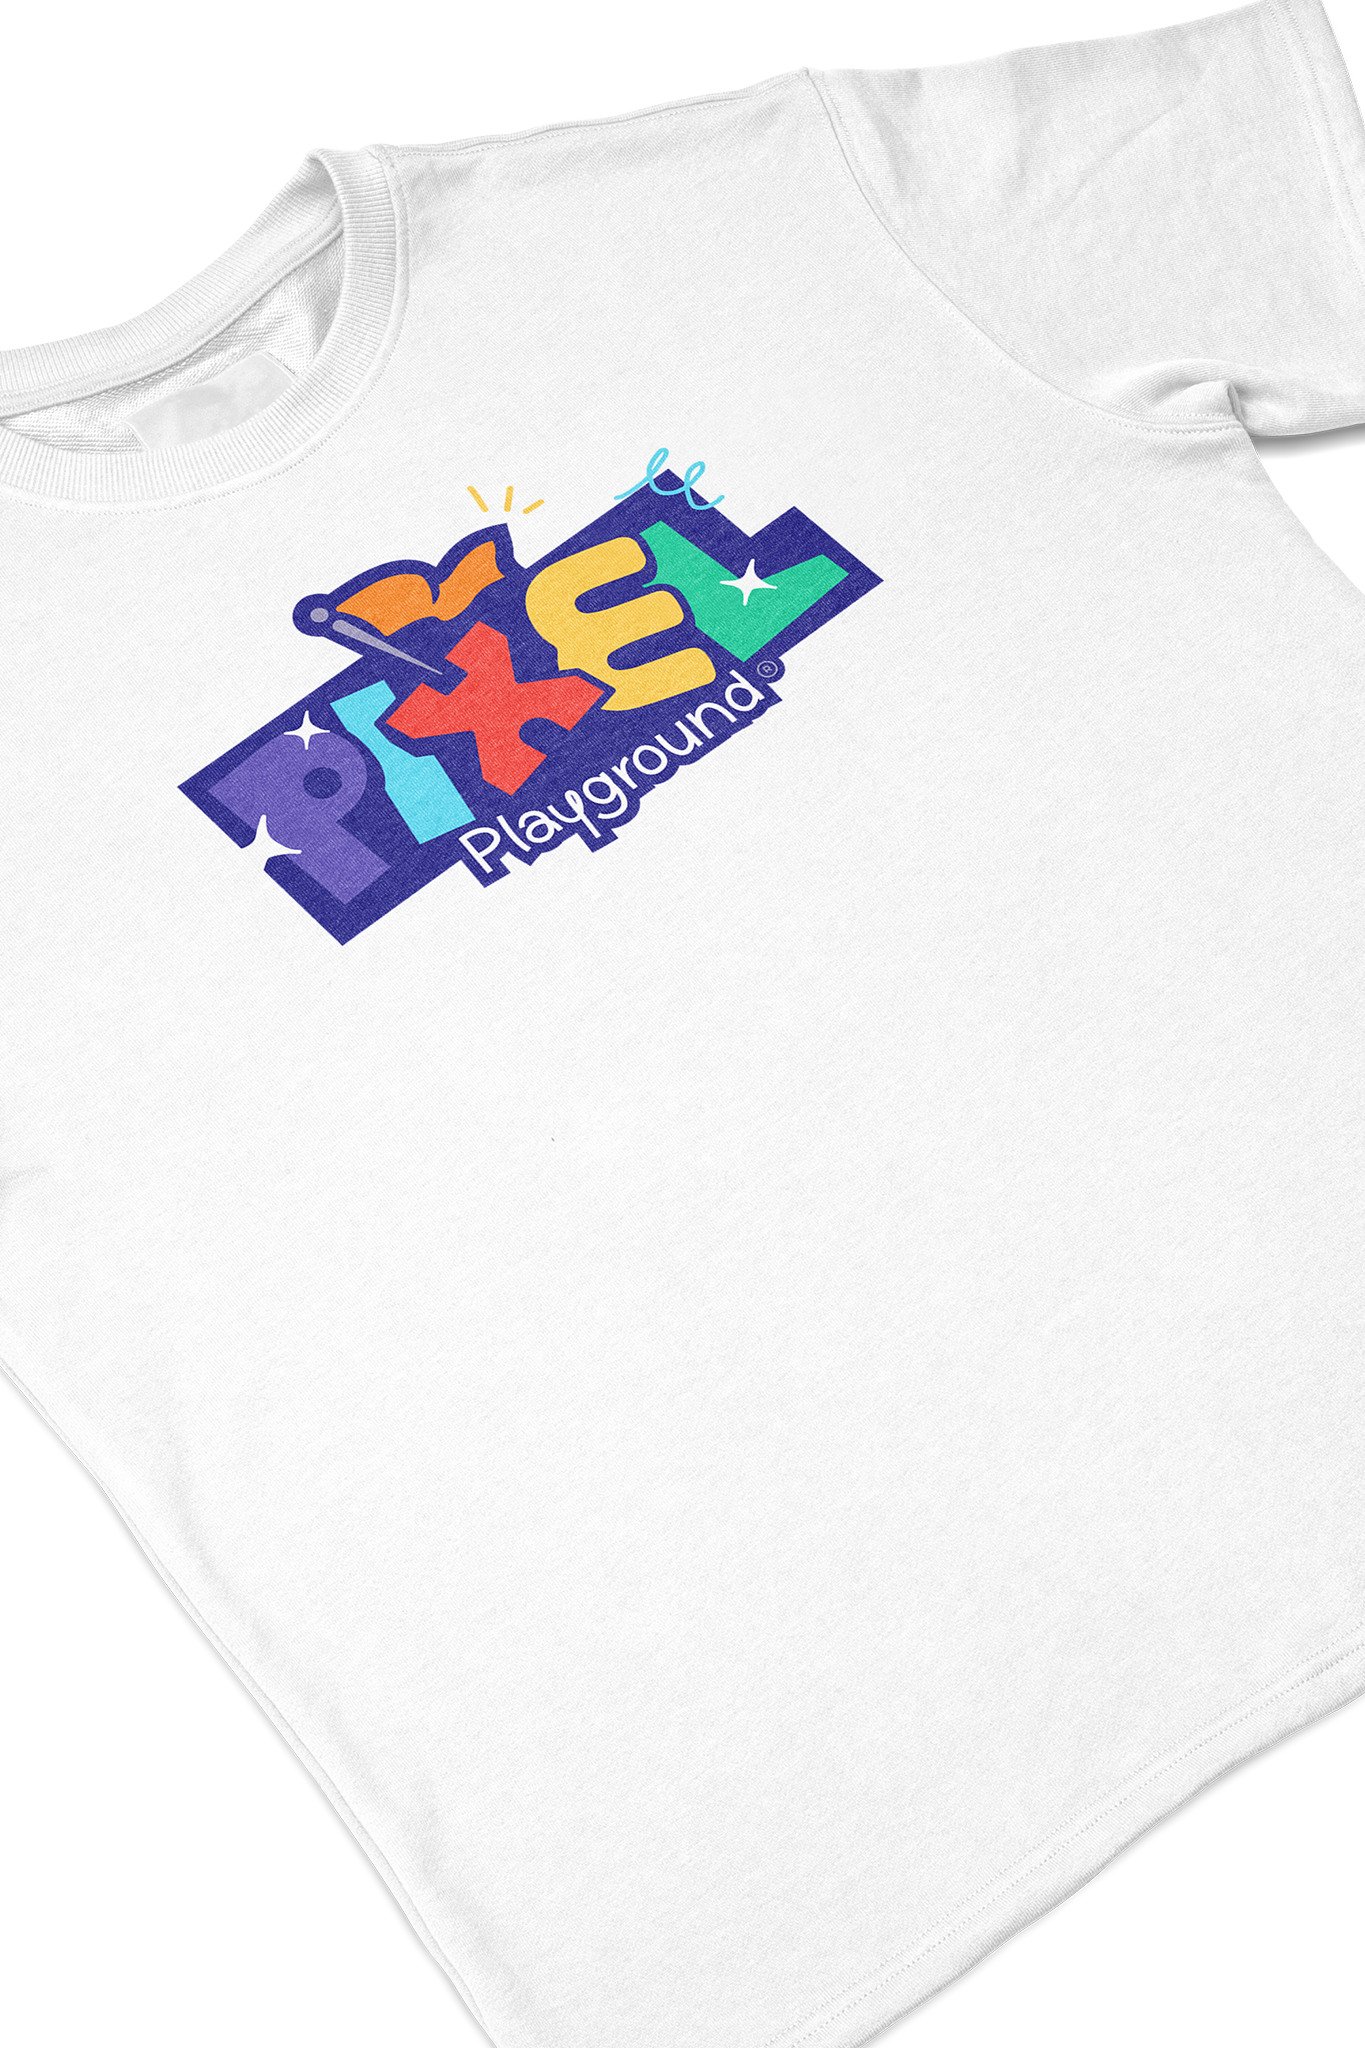 Close-up of a white t-shirt with the Pixel Playground logo on the front.